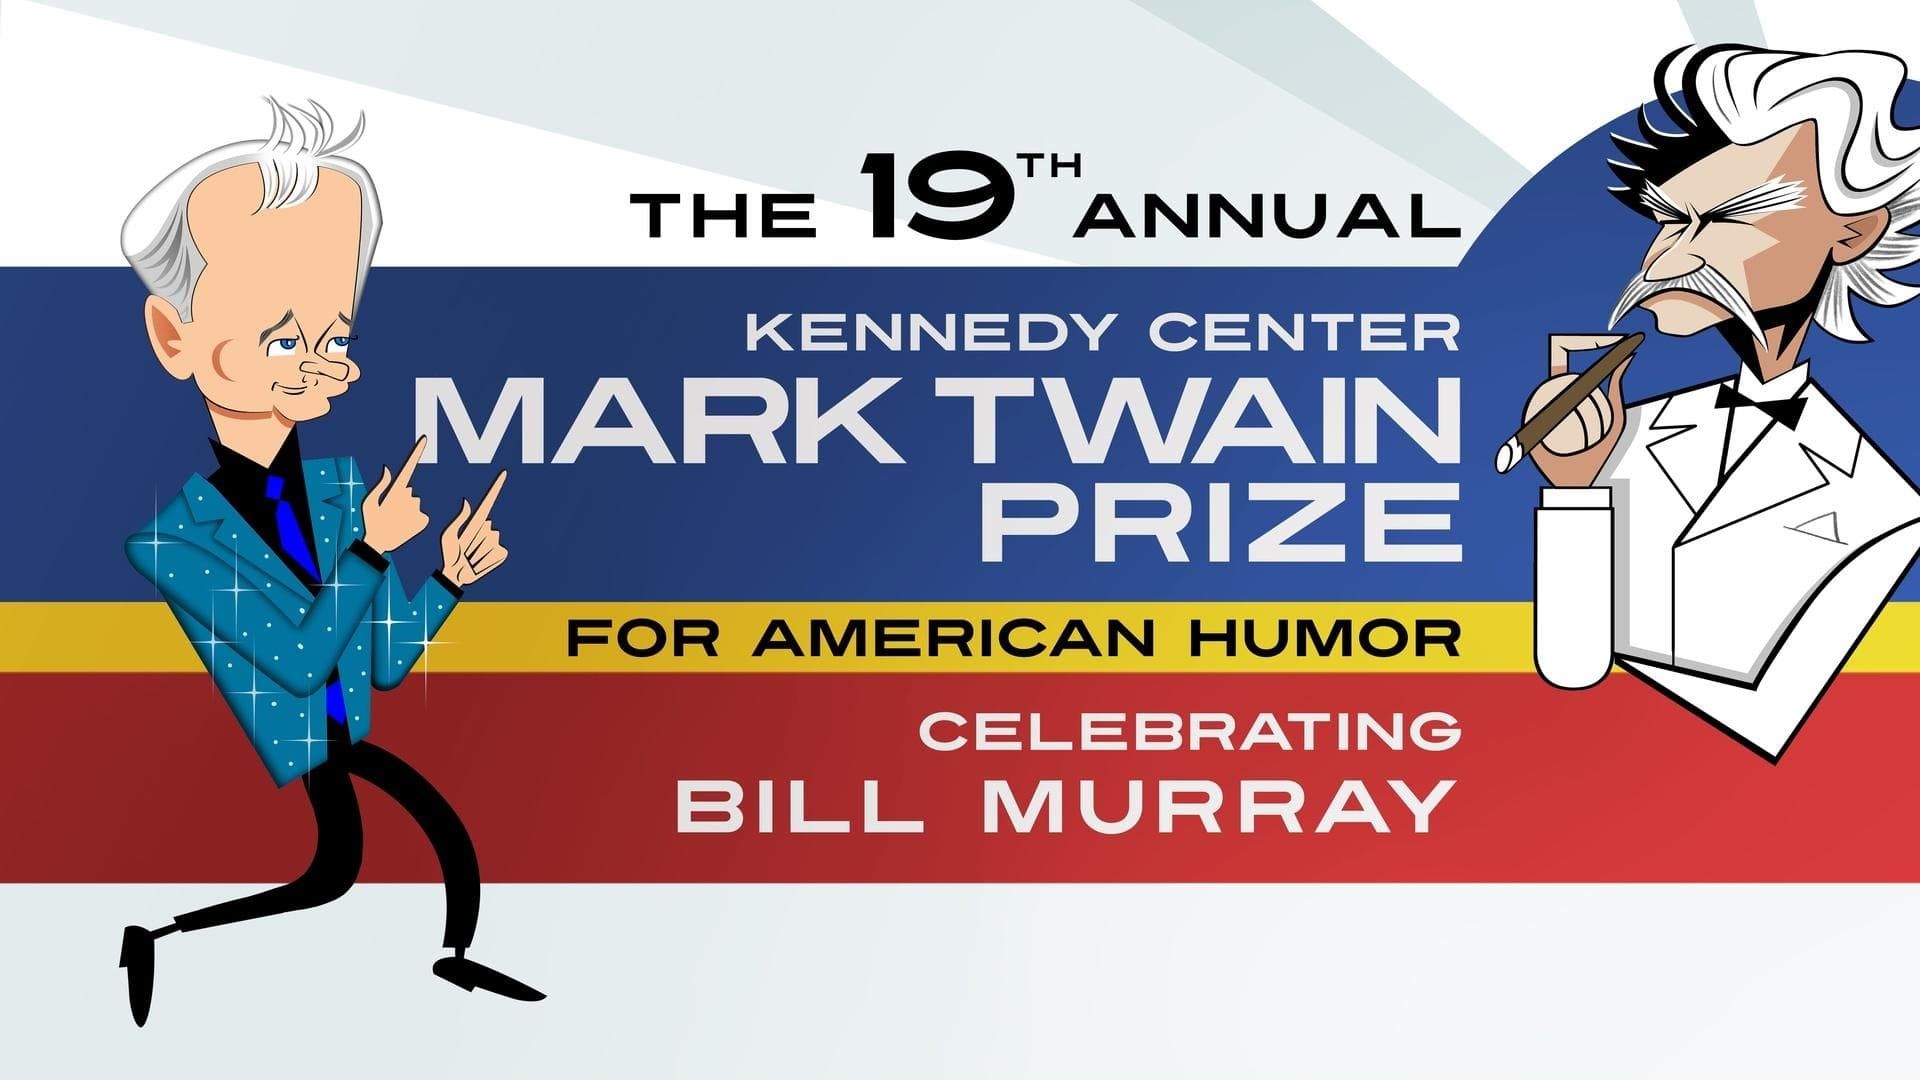 The 19th Annual the Kennedy Center Mark Twain Prize for American Humor: Celebrating Bill Murray background